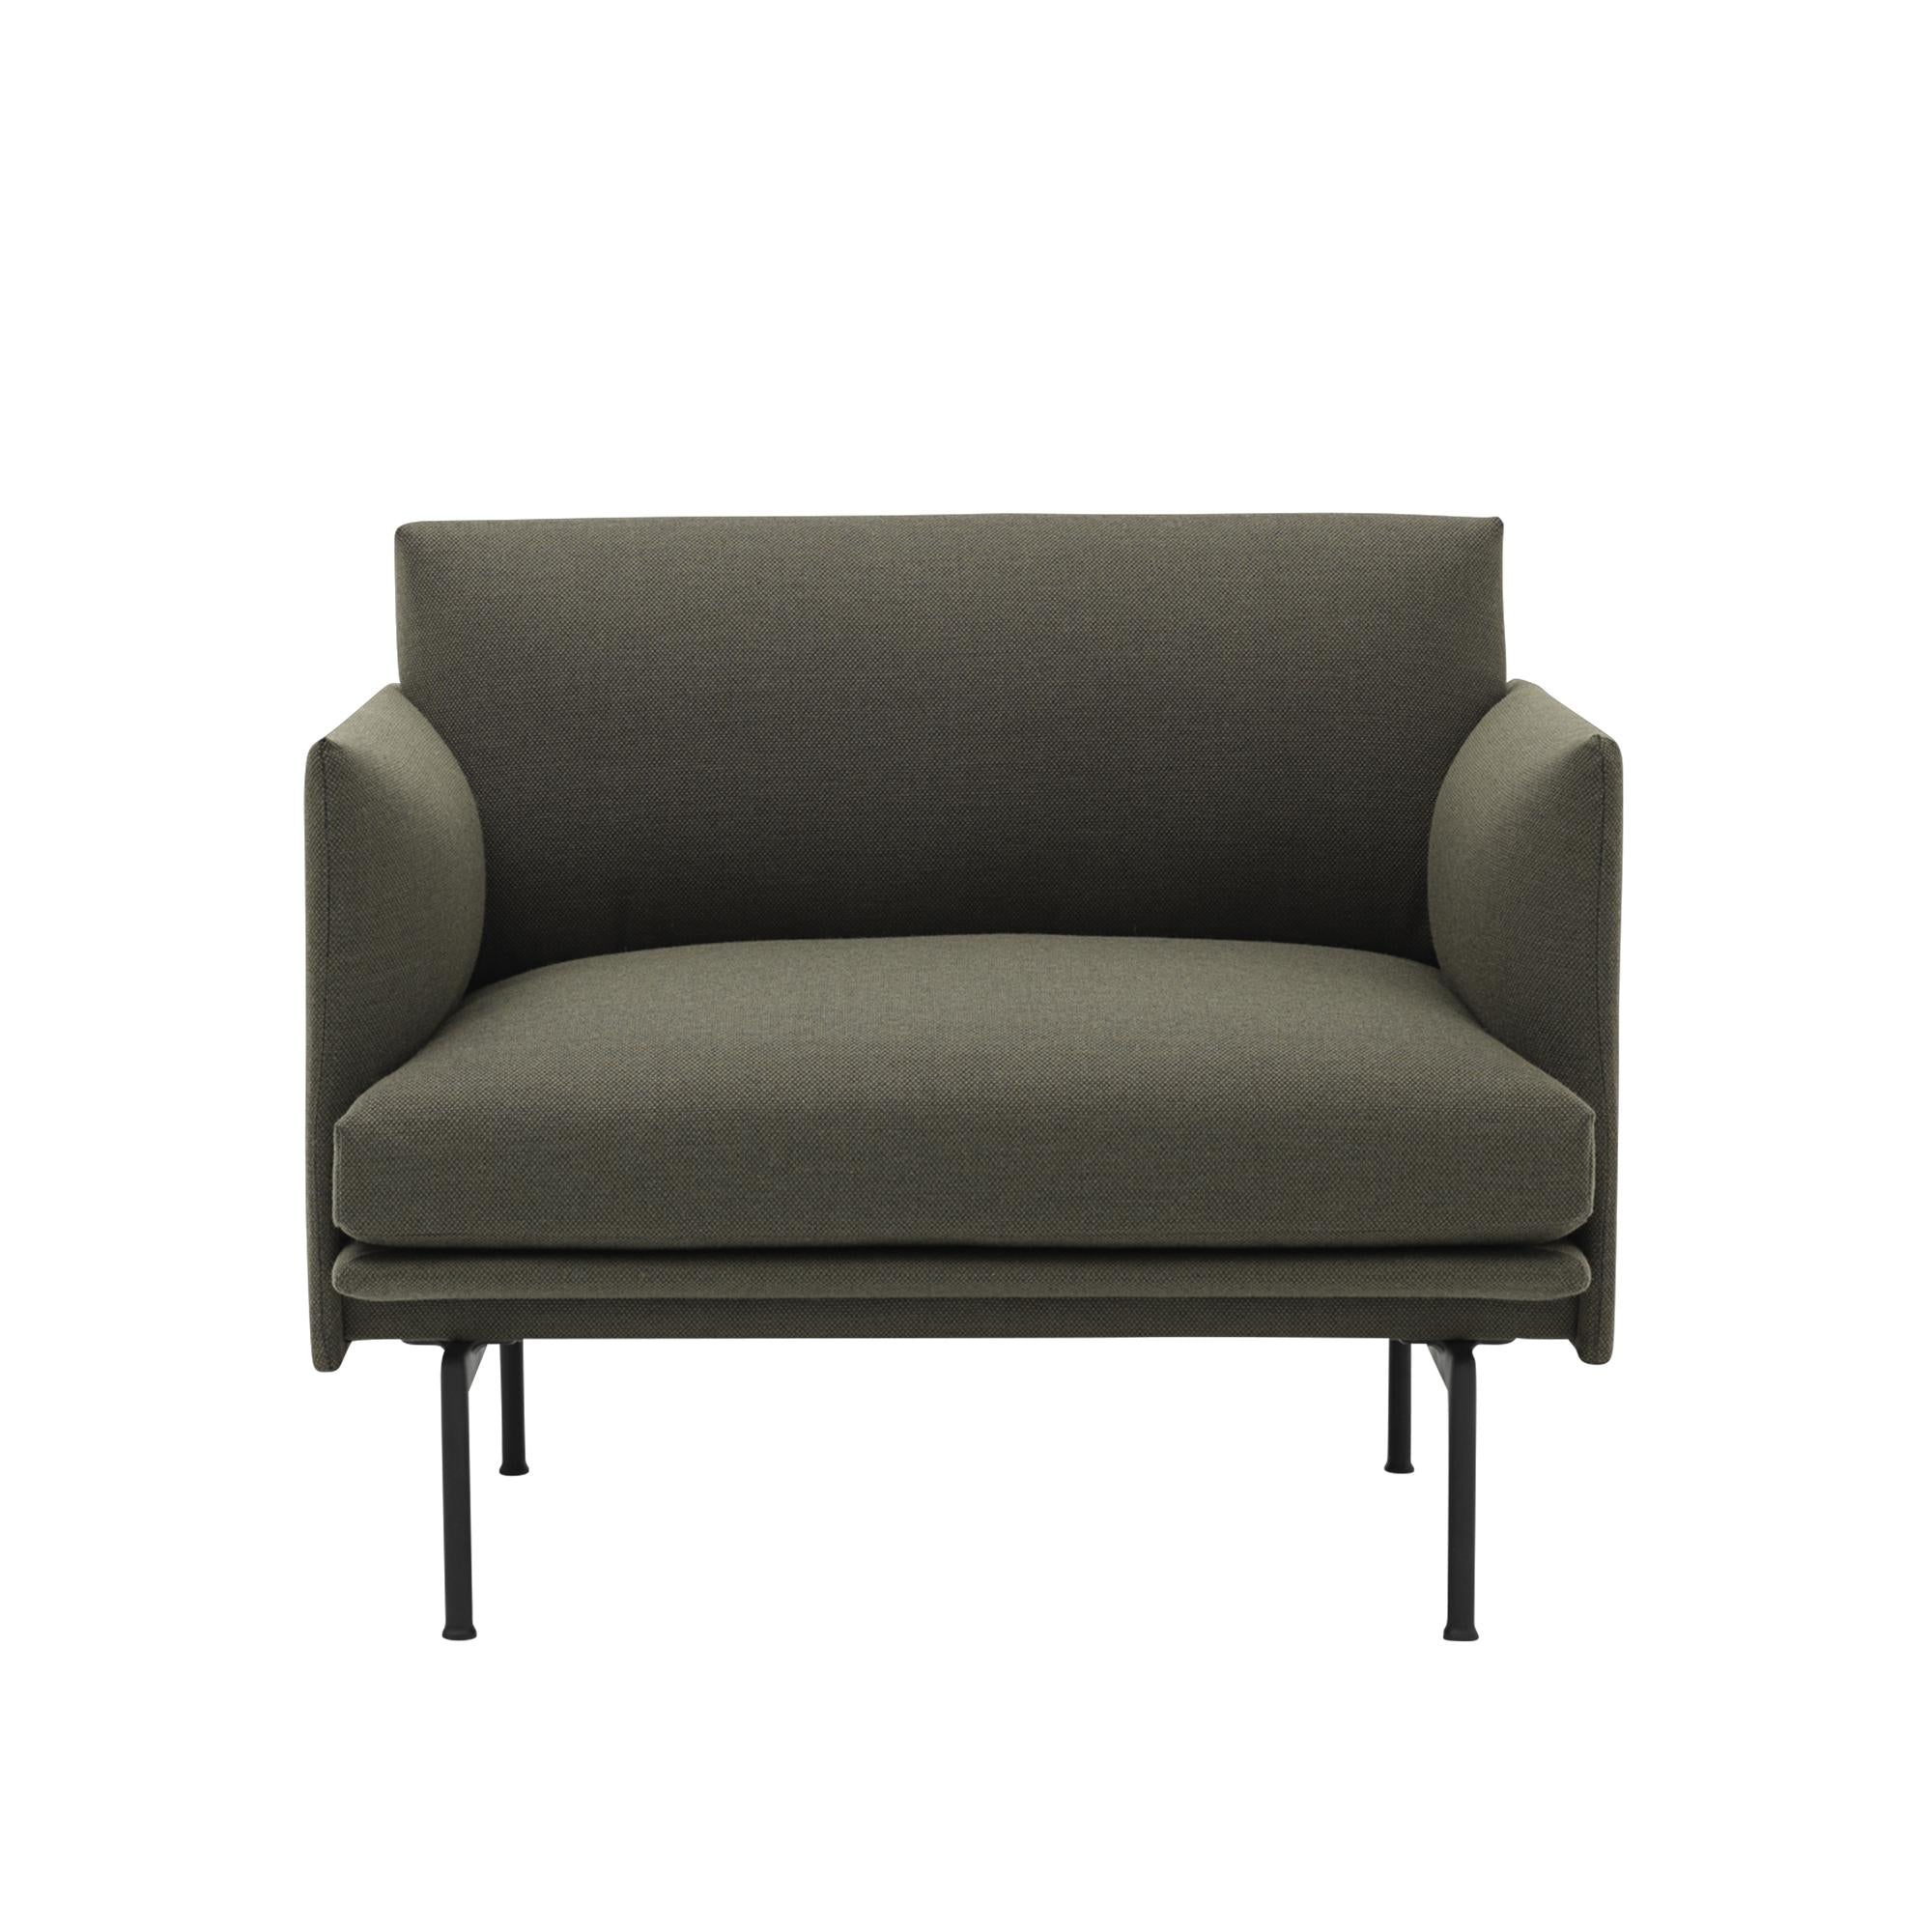 Muuto Outline Sessel-Stoff, Vancouver 14